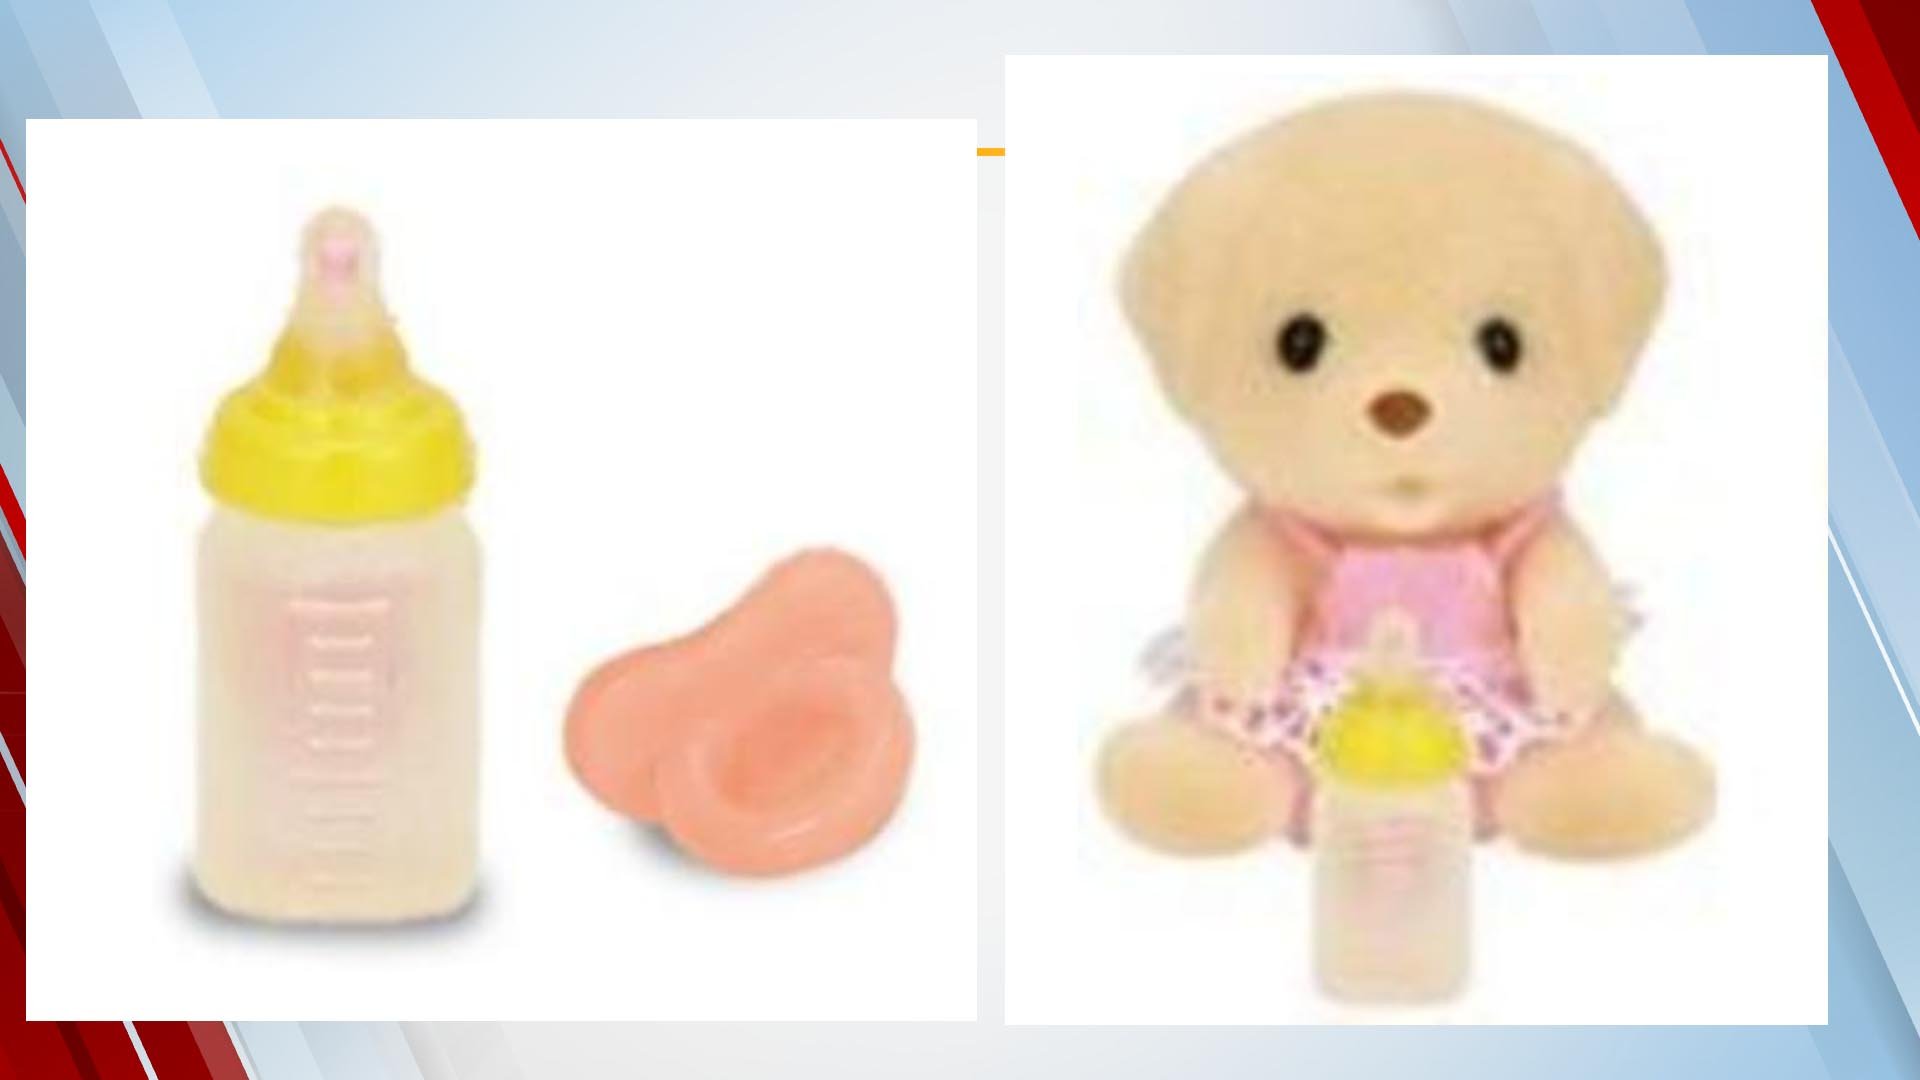 Calico Critters Recalls 3.2 Million Toys After Death Of 2 Children